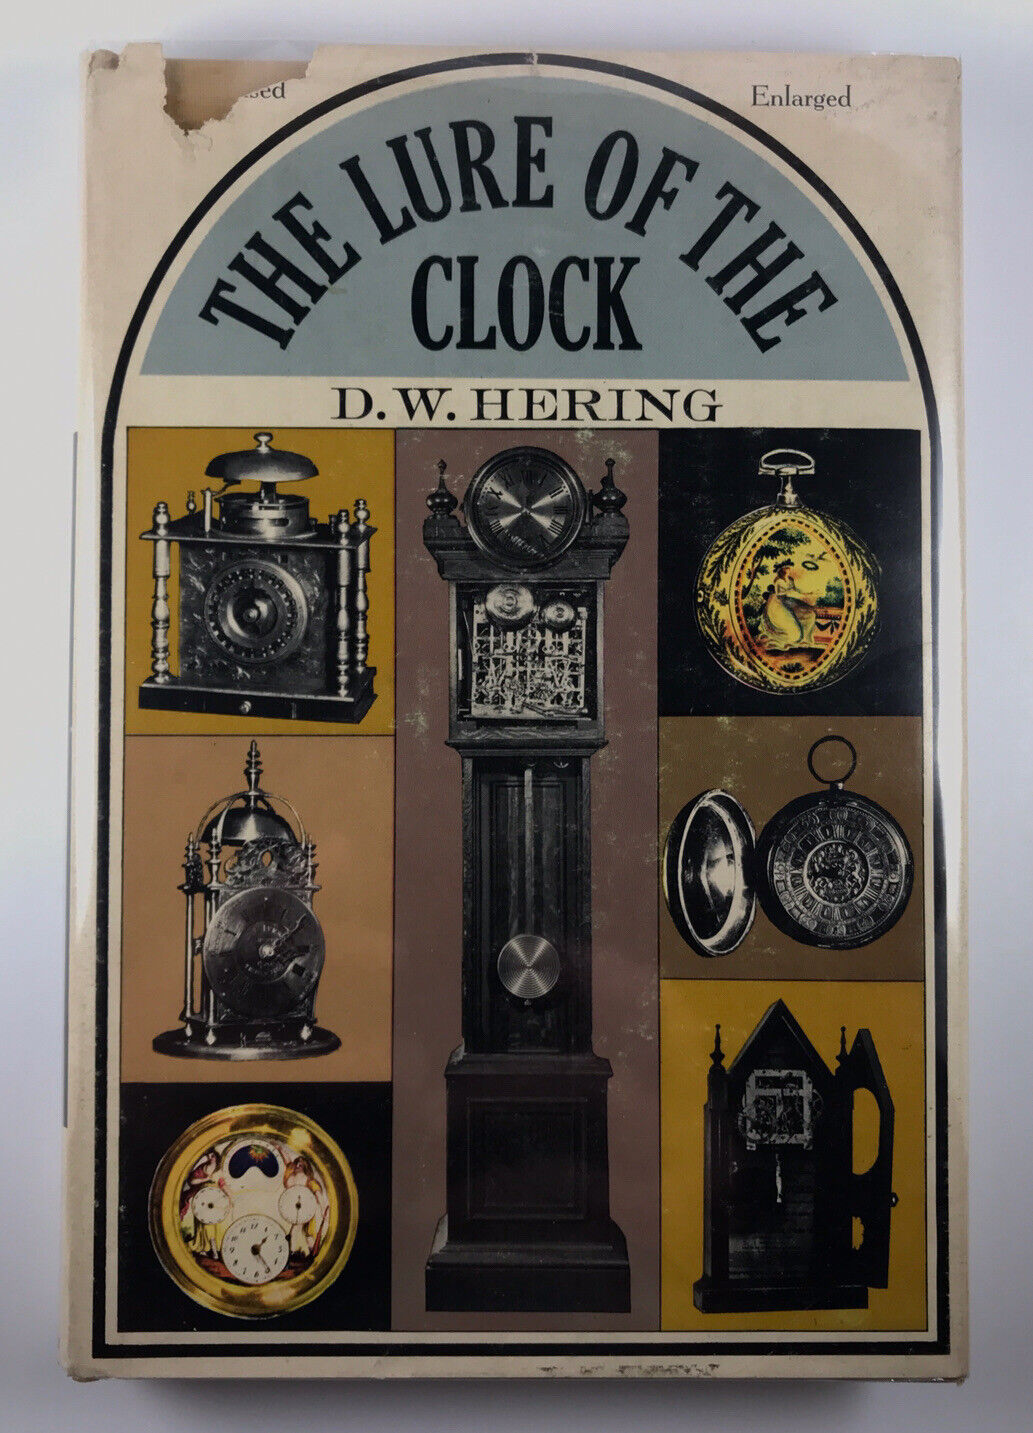 D W HERING Lure of the Clock An Account of the James Arthur Collection 1963